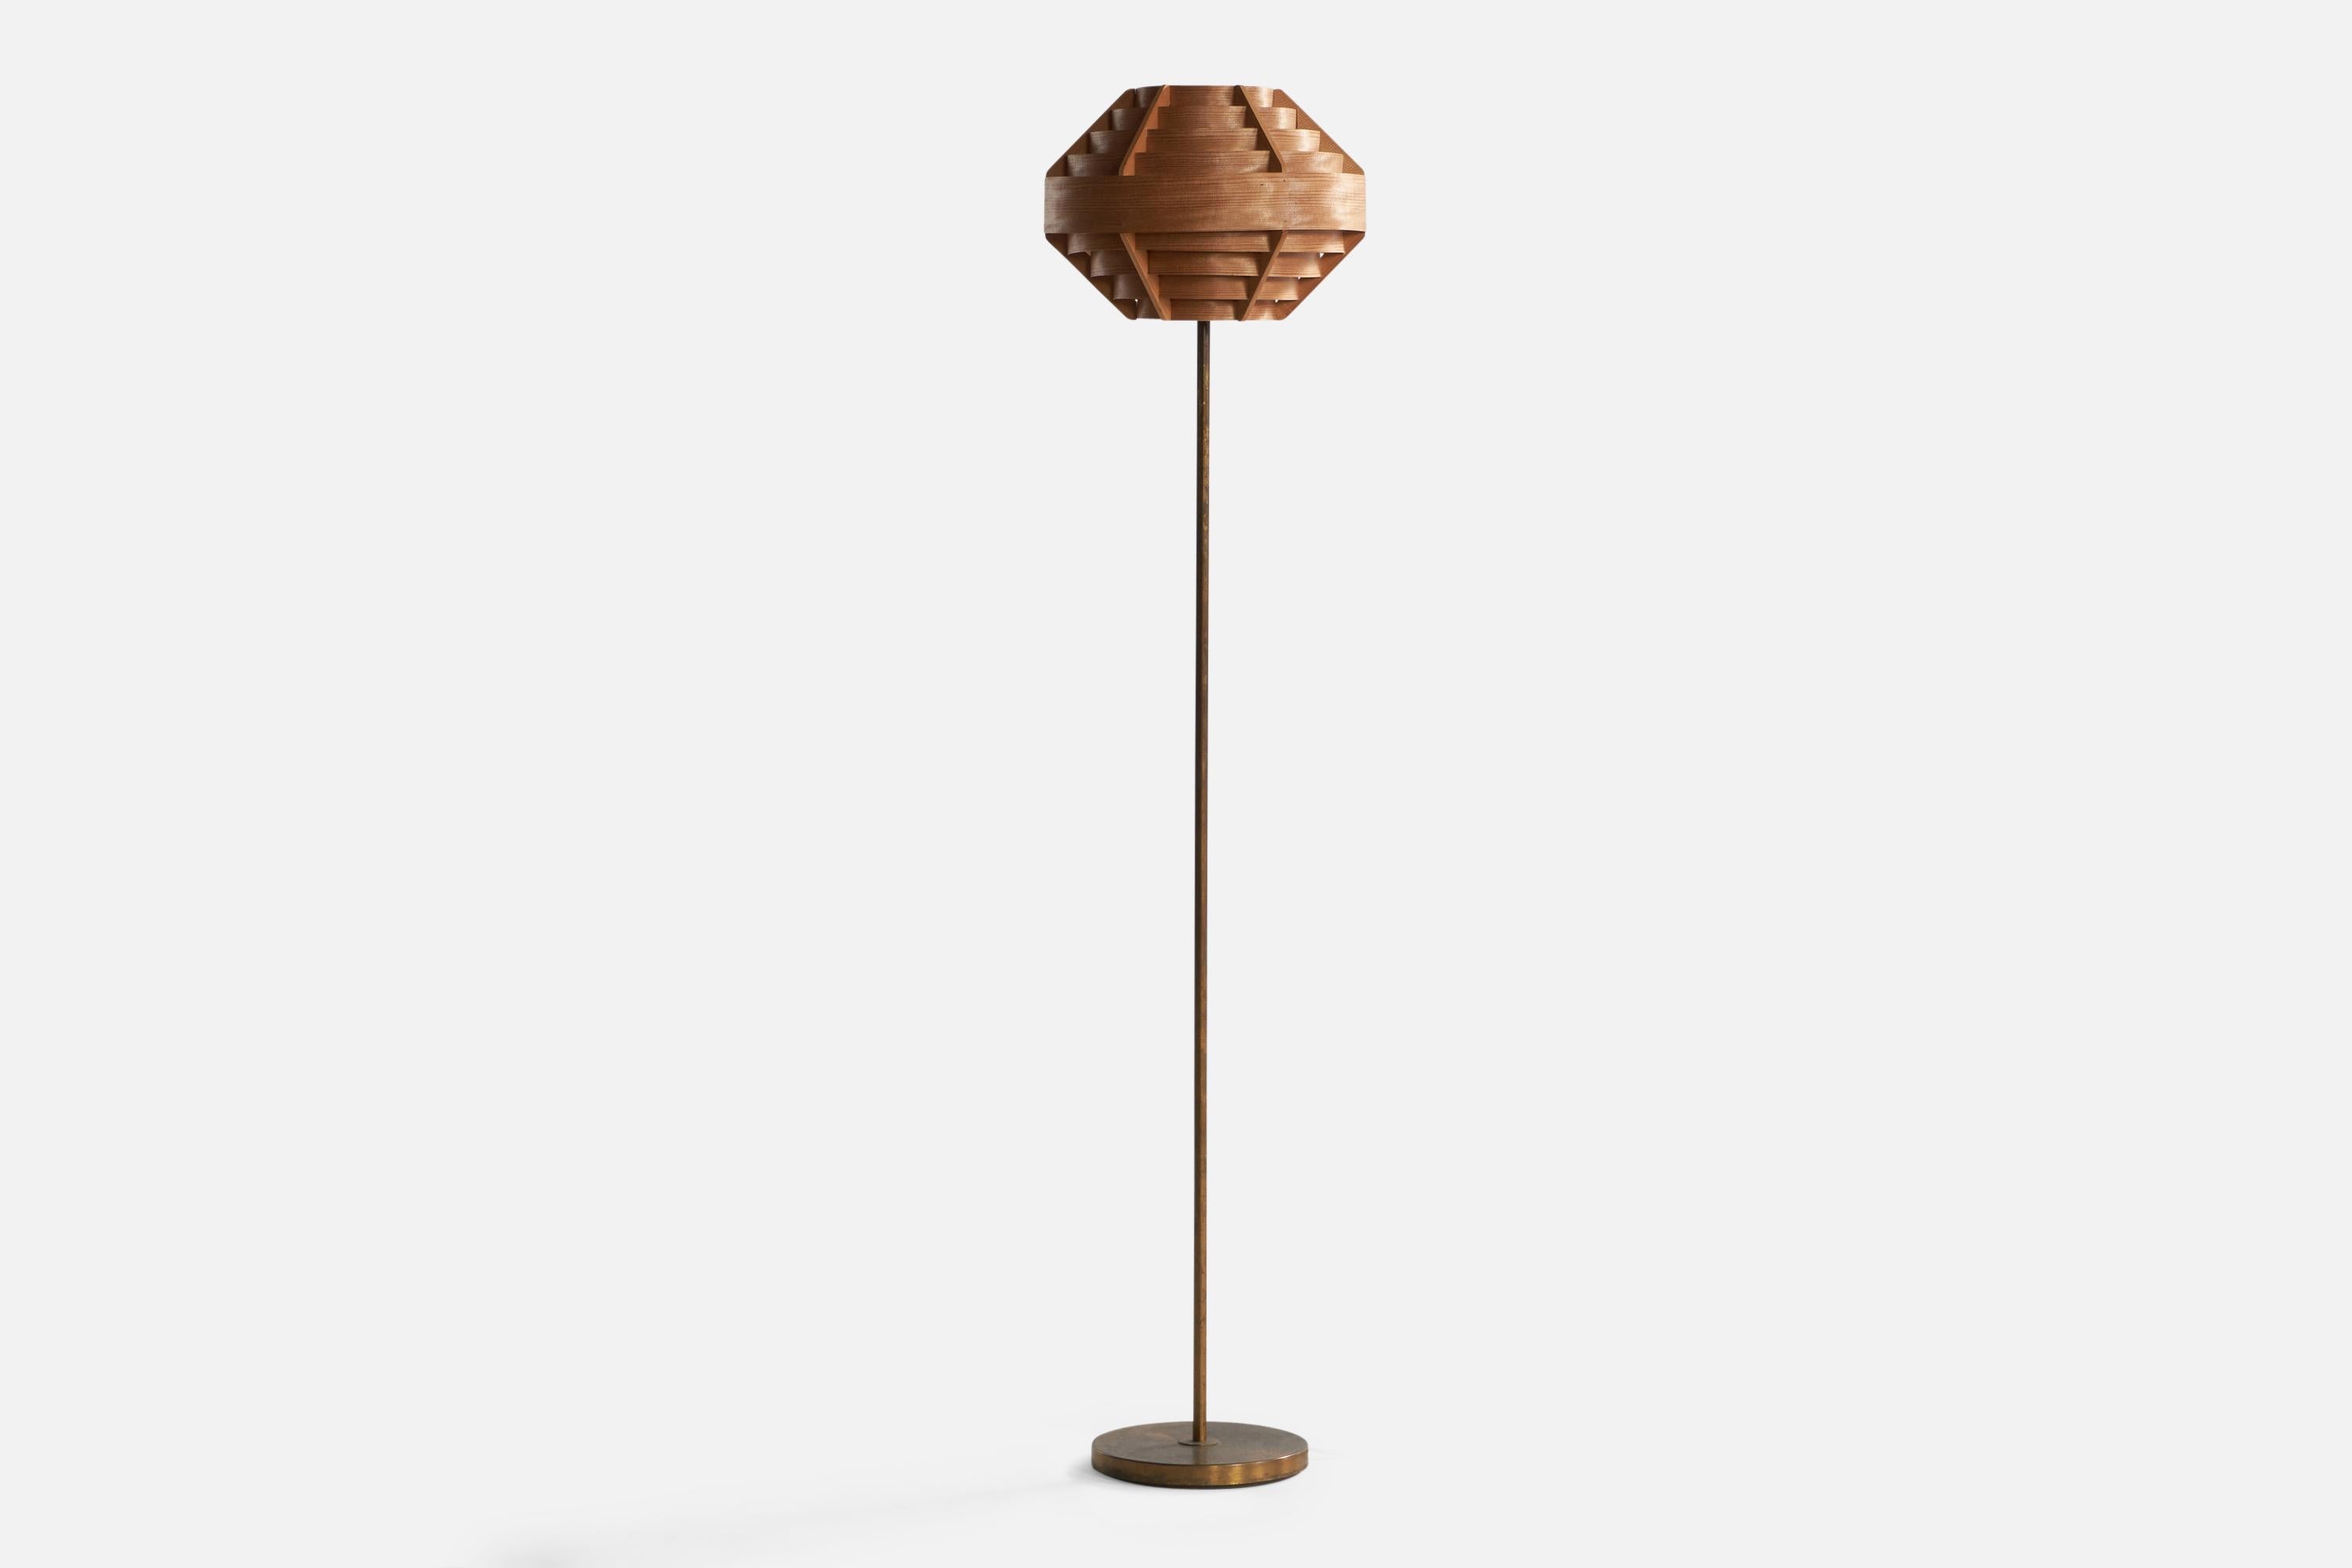 A brass, pine and moulded pine-veneer floor lamp designed and produced in Sweden, c. 1950s.
'
With an assorted lampshade by Hans-Agne Jakobsson.

Overall Dimensions (inches): 60.38” Height x 13.5” Diameter. Stated dimensions include shade.
Bulb